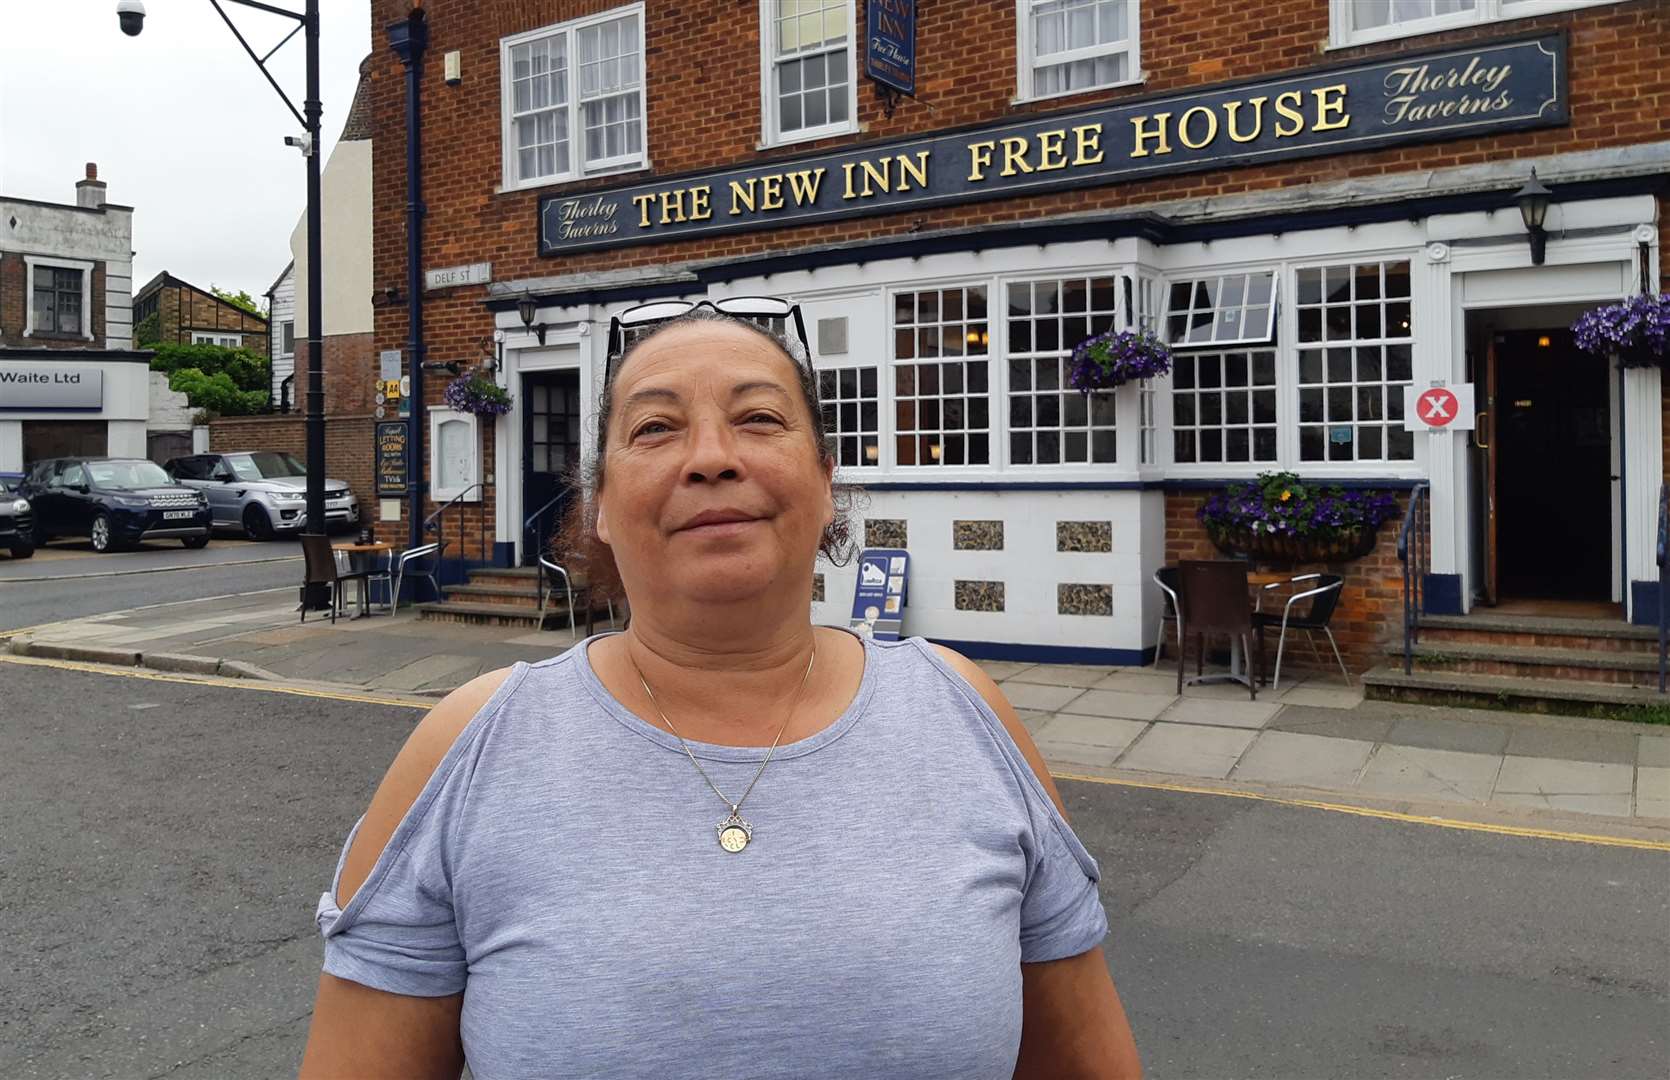 Vicky Reynolds of the New Inn said she hopes this year will be on a par with the 2011 Open